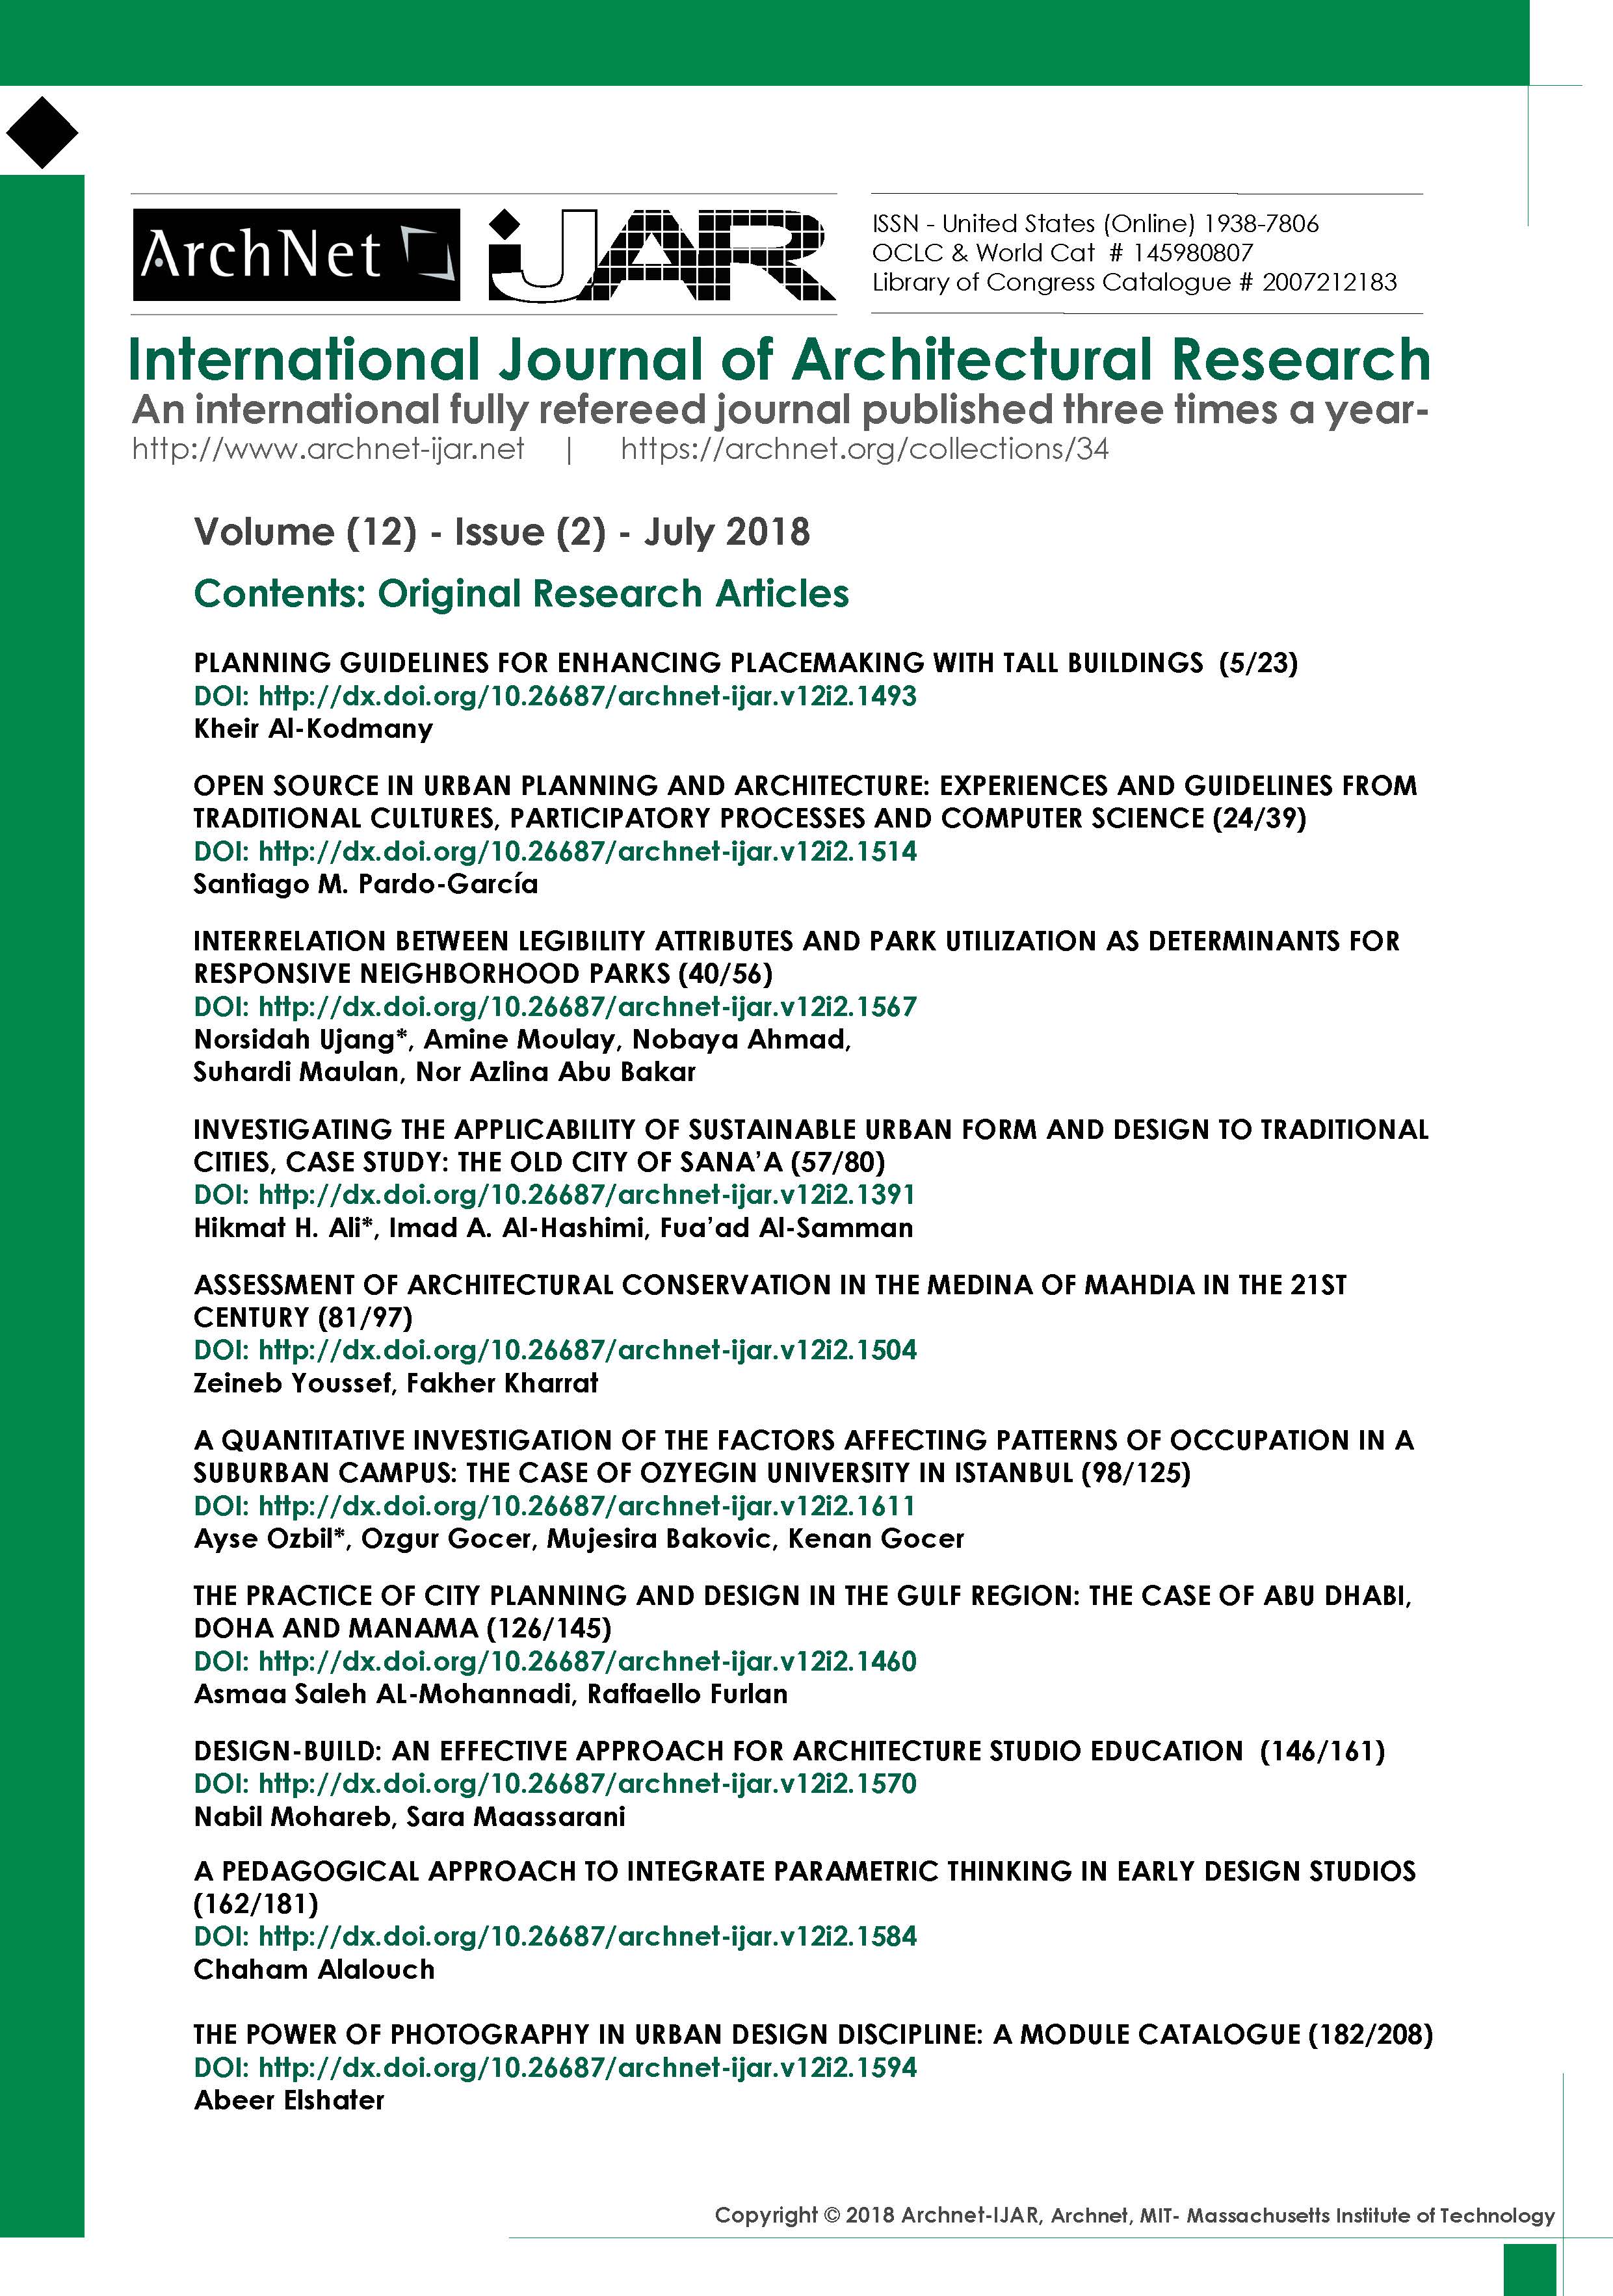 Farzad Pour Rahimian - <div style="text-align: justify;"><span style="color: rgb(1, 1, 1);">Archnet-IJAR International Journal of Architectural Research is an interdisciplinary, fully-refereed scholarly online journal of architecture, planning, and built environment studies. Two international boards (advisory and editorial) ensure the quality of scholarly papers and allow for a comprehensive academic review of contributions spanning a wide spectrum of issues, methods, theoretical approaches and architectural and development practices.</span><span class="apple-converted-space" style="color: rgb(1, 1, 1);">&nbsp;</span><br></div><div style="text-align: justify;"><span style="color: rgb(1, 1, 1);"><br></span></div><span style="background-image: initial; background-position: initial; background-size: initial; background-repeat: initial; background-attachment: initial; background-origin: initial; background-clip: initial;"><div style="color: rgb(1, 1, 1); text-align: justify;">ArchNet-IJAR provides a comprehensive academic review of a wide spectrum of issues, methods, and theoretical approaches. It aims to bridge theory and practice in the fields of architectural/design research and urban planning/built environment studies, reporting on the latest research findings and innovative approaches for creating responsive environments.</div><div style="text-align: justify;"><div style="color: rgb(1, 1, 1);"><br></div></div></span>